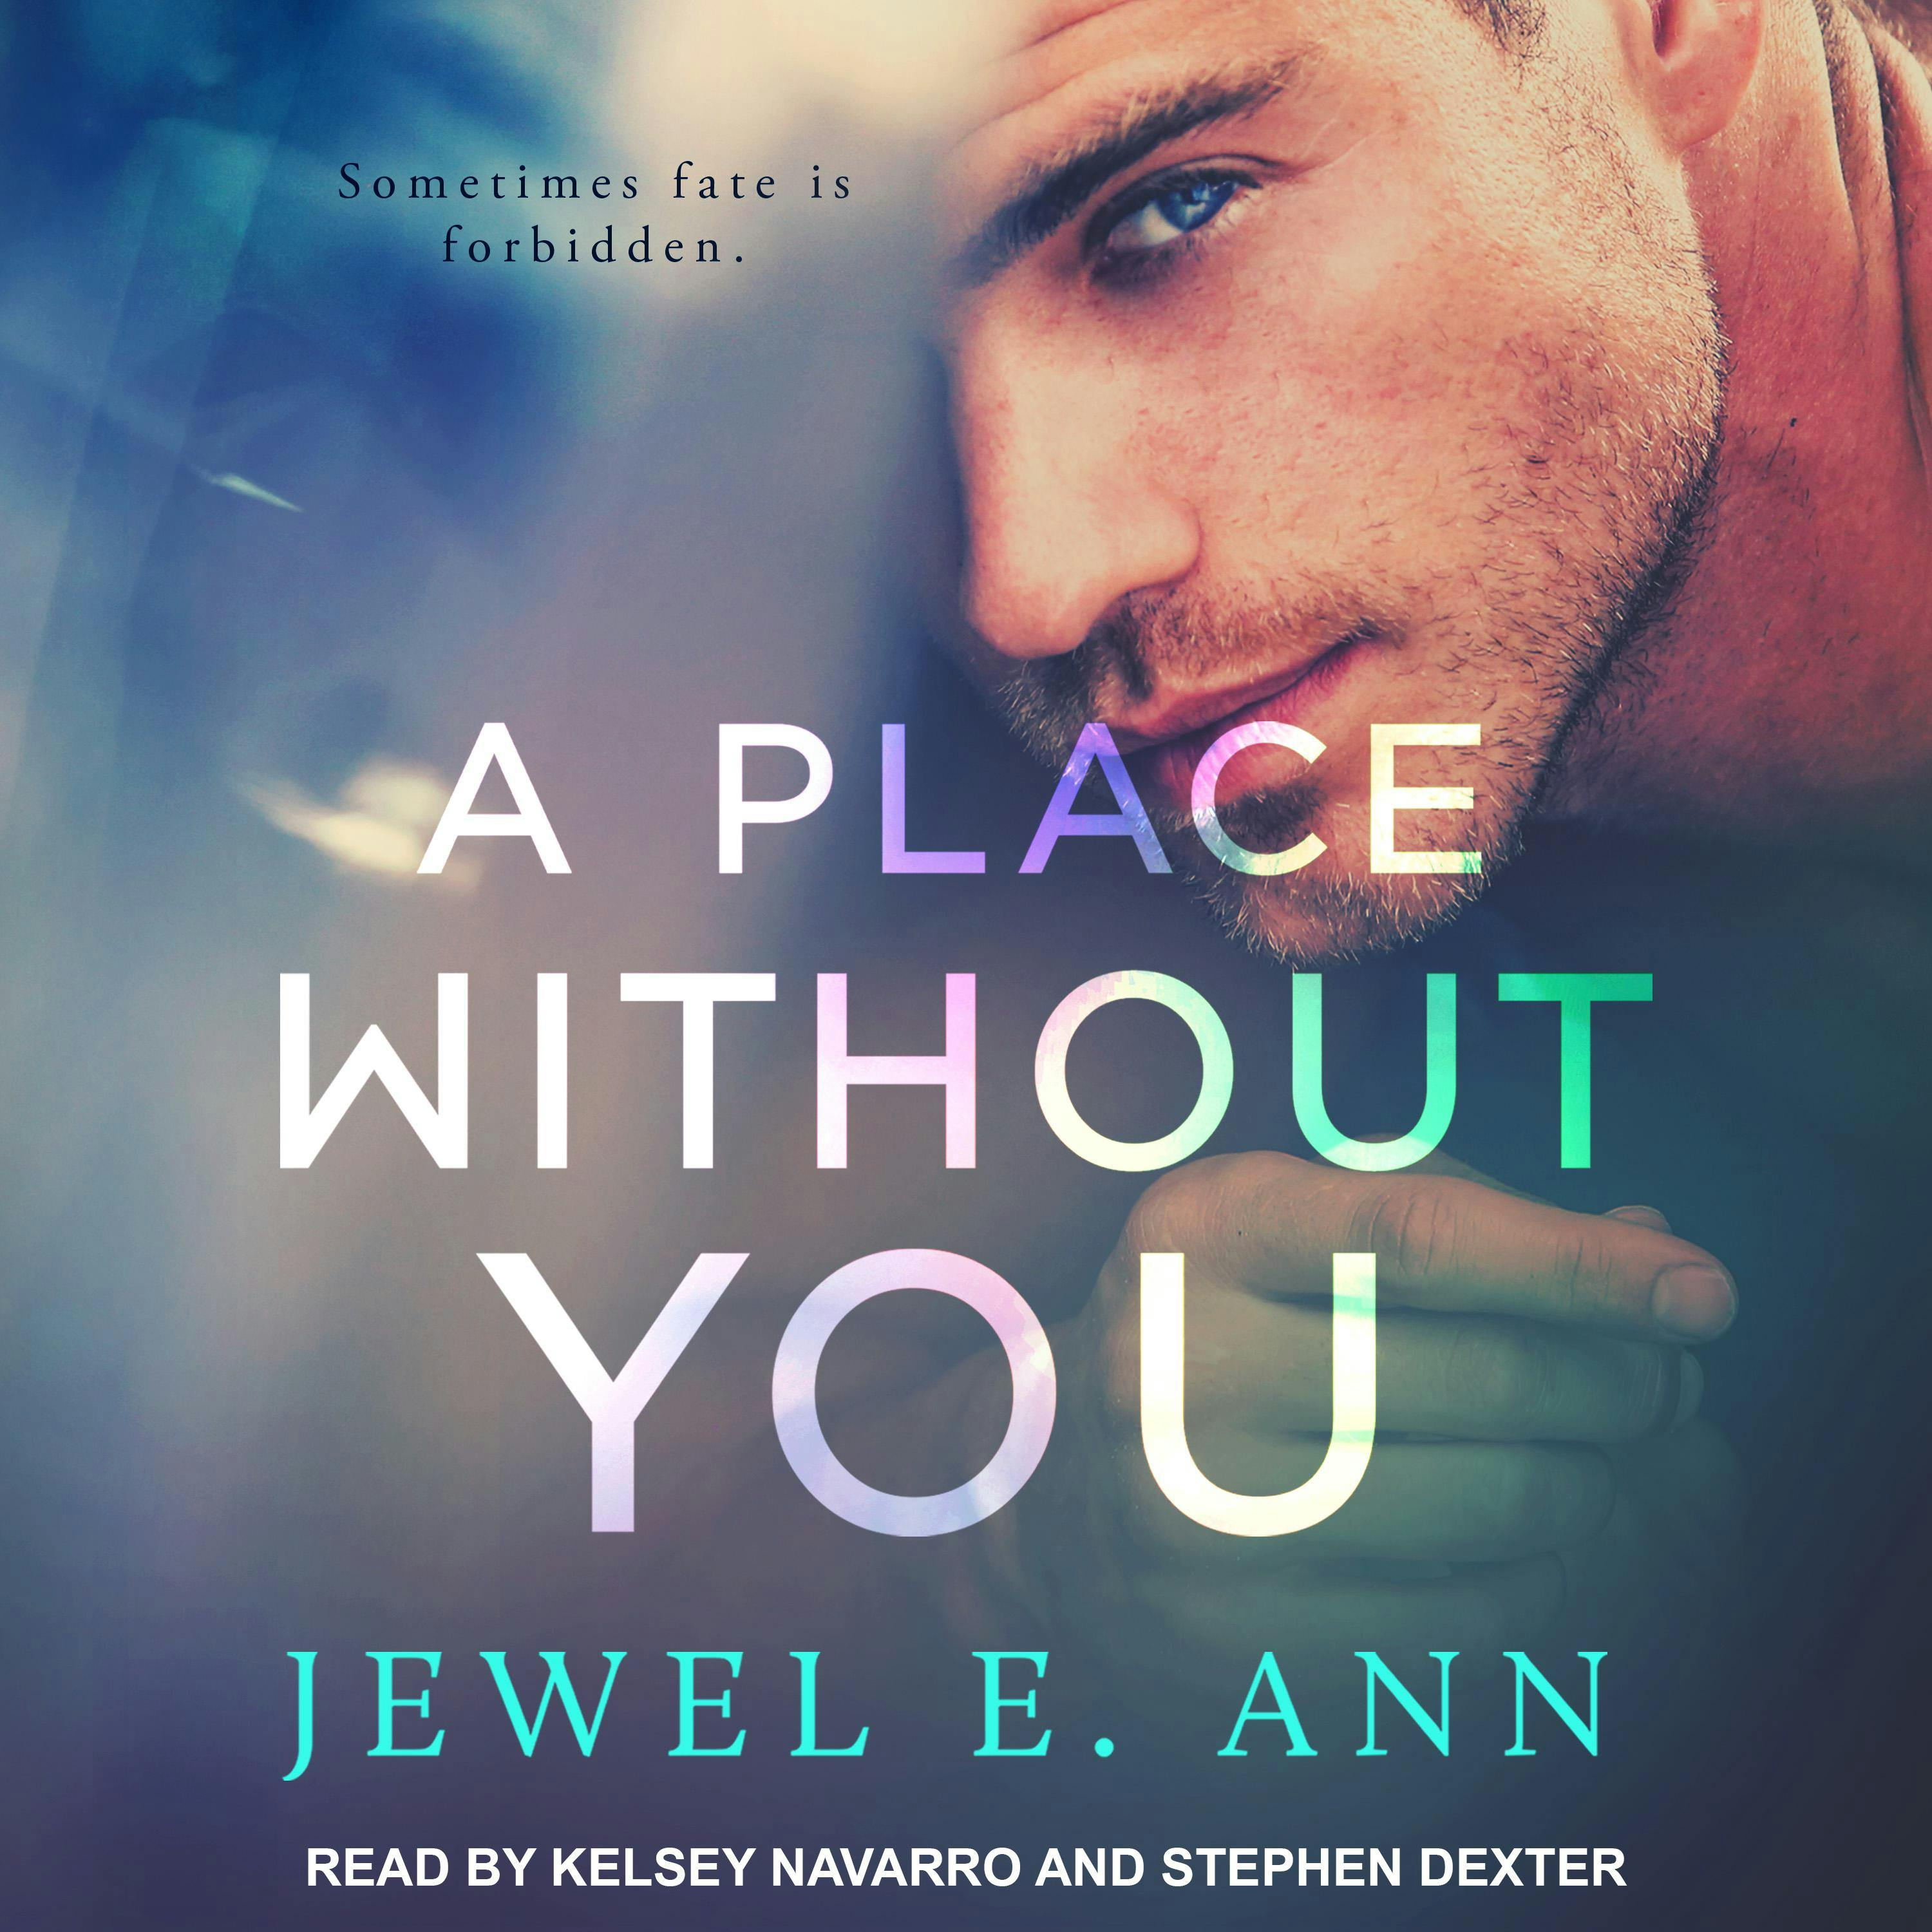 A Place Without You - Jewel E. Ann